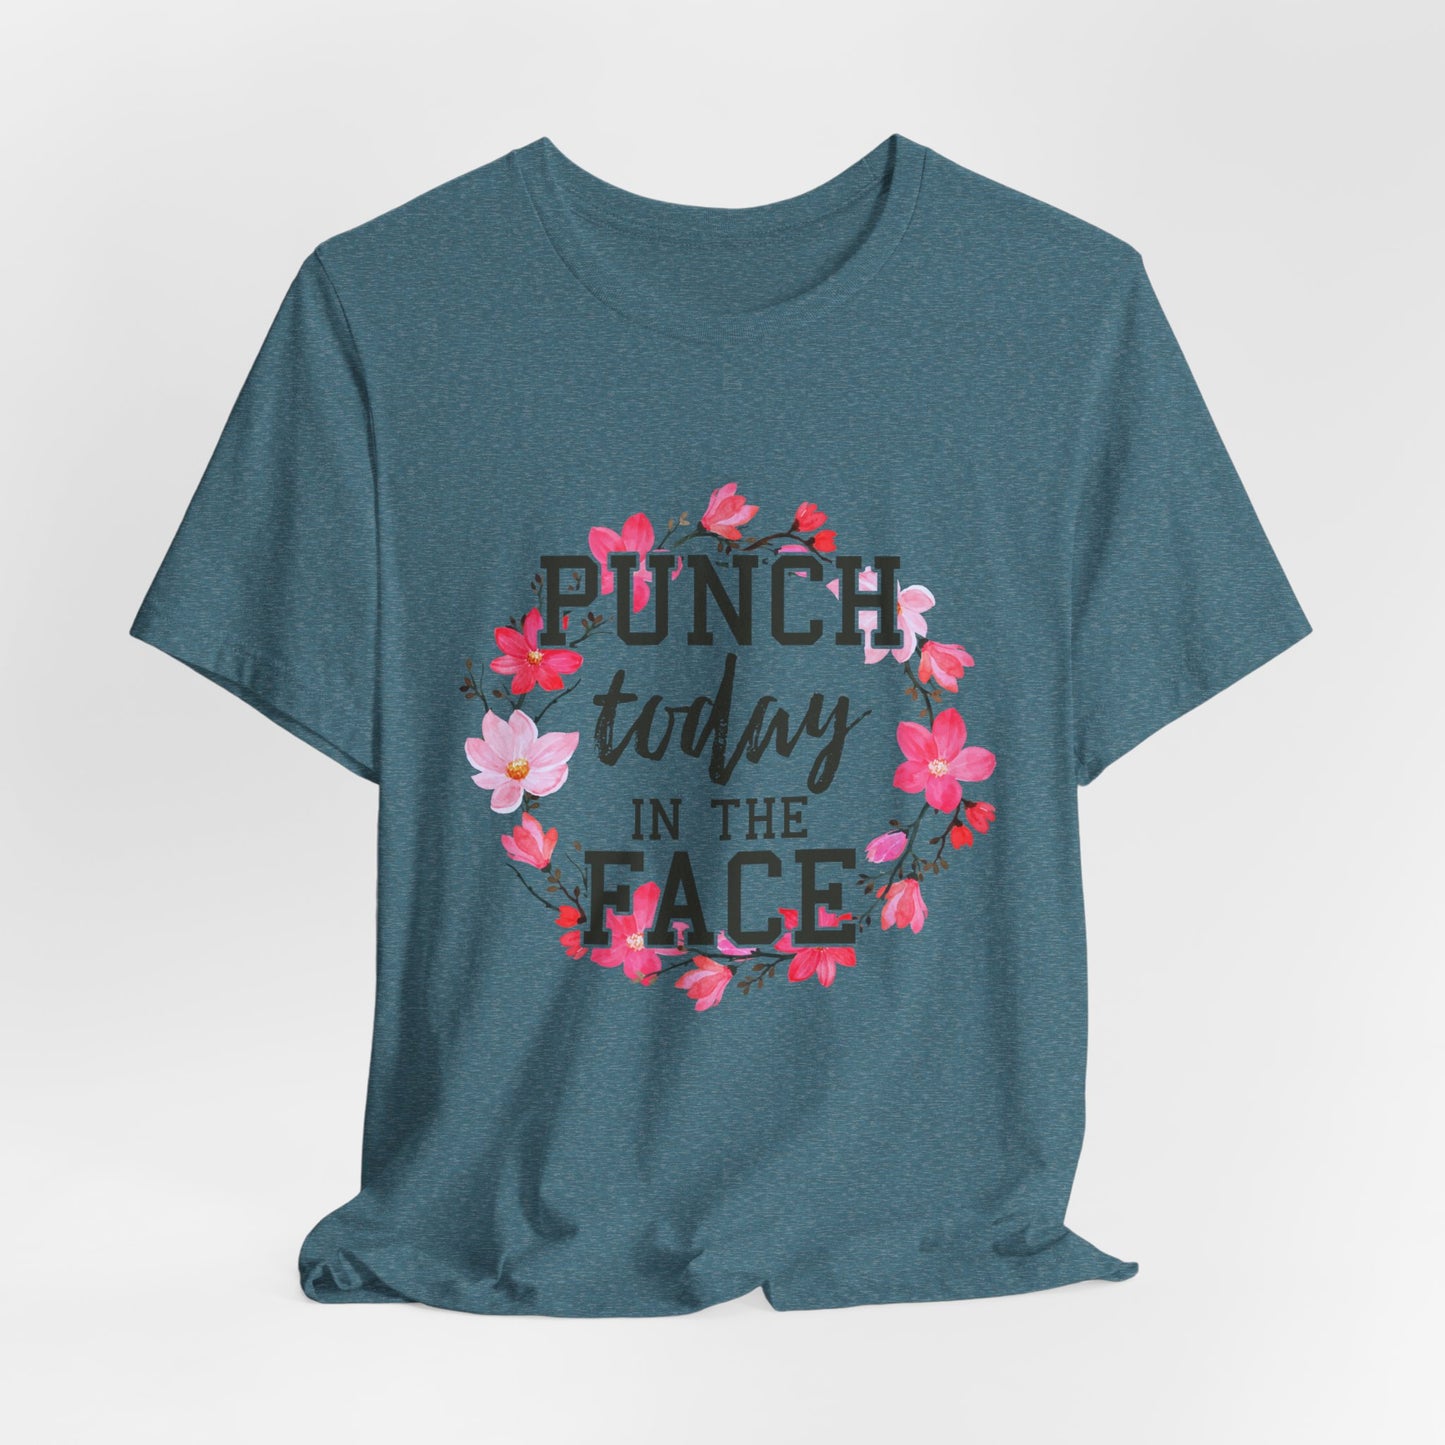 Punch Today in the Face Women's Funny Short Sleeve Tshirt